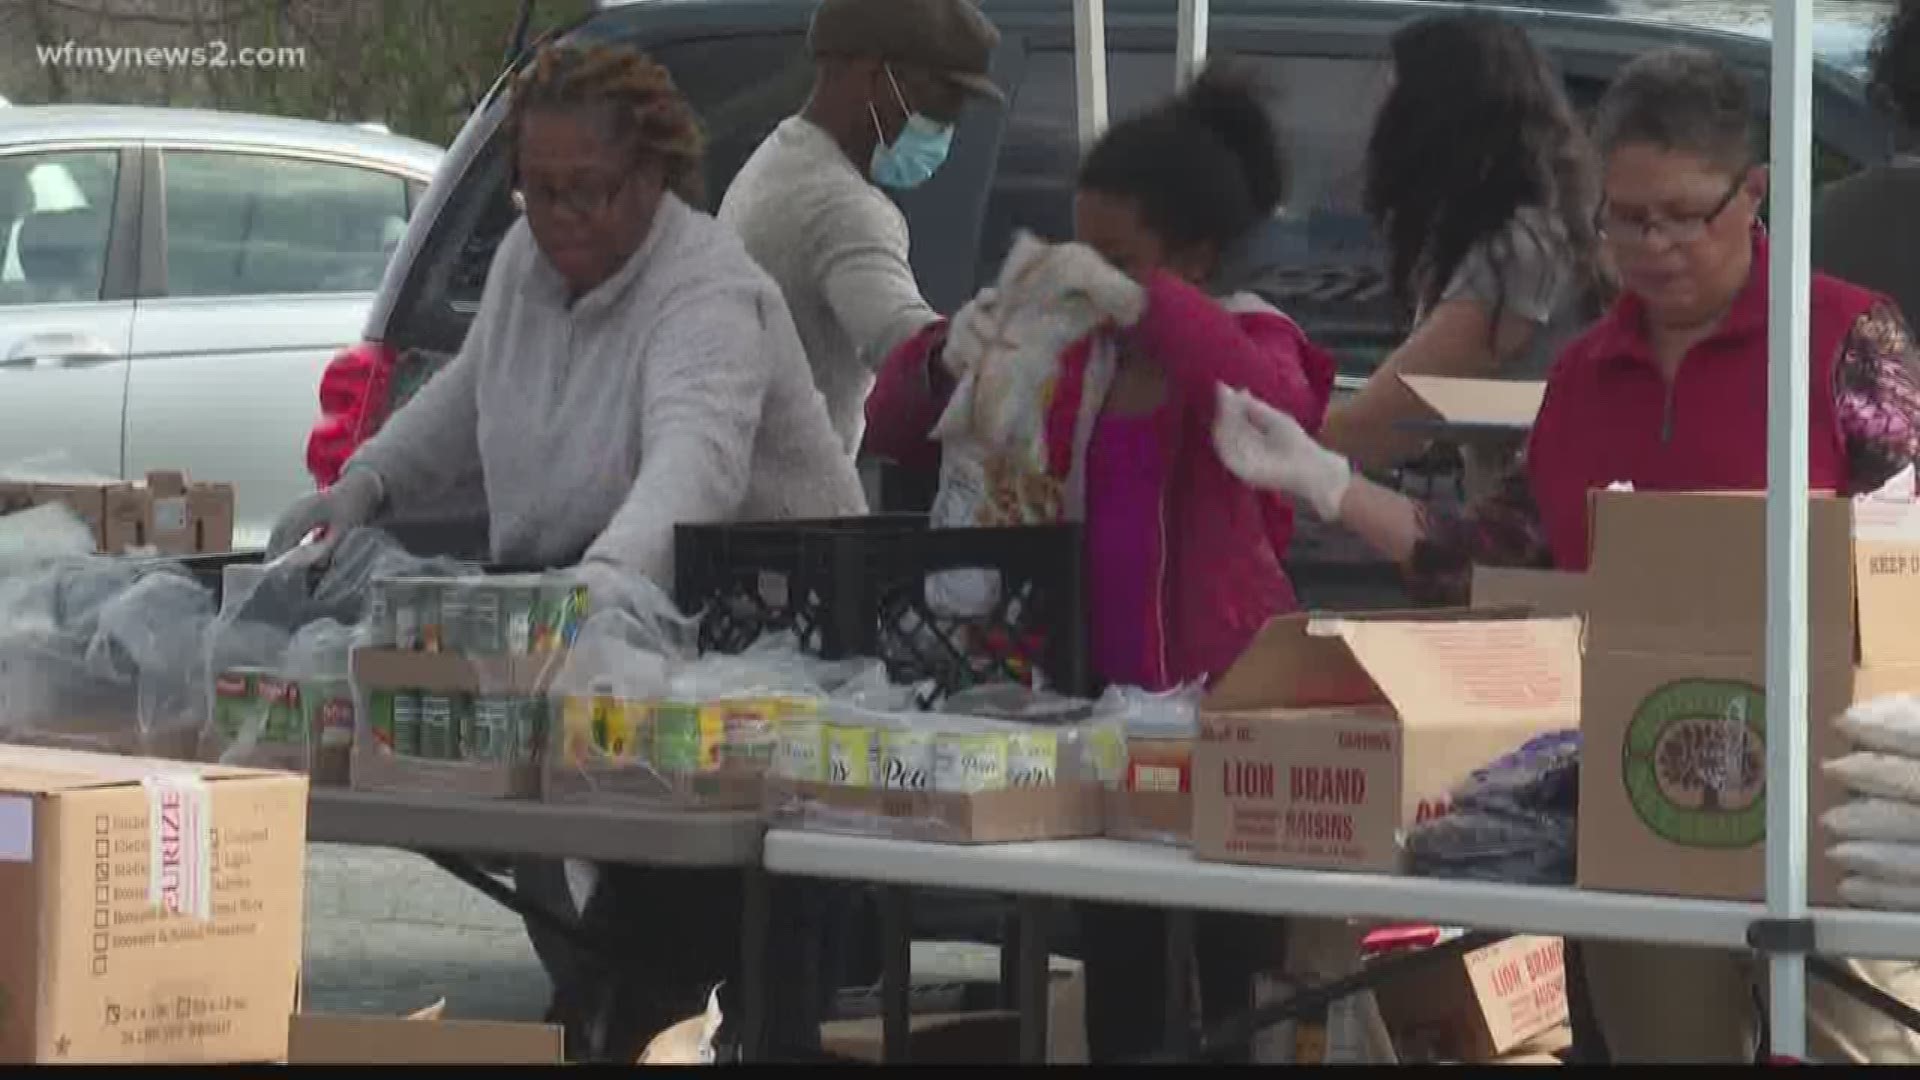 Donations are coming in for those in need right now, and the service is expanding.